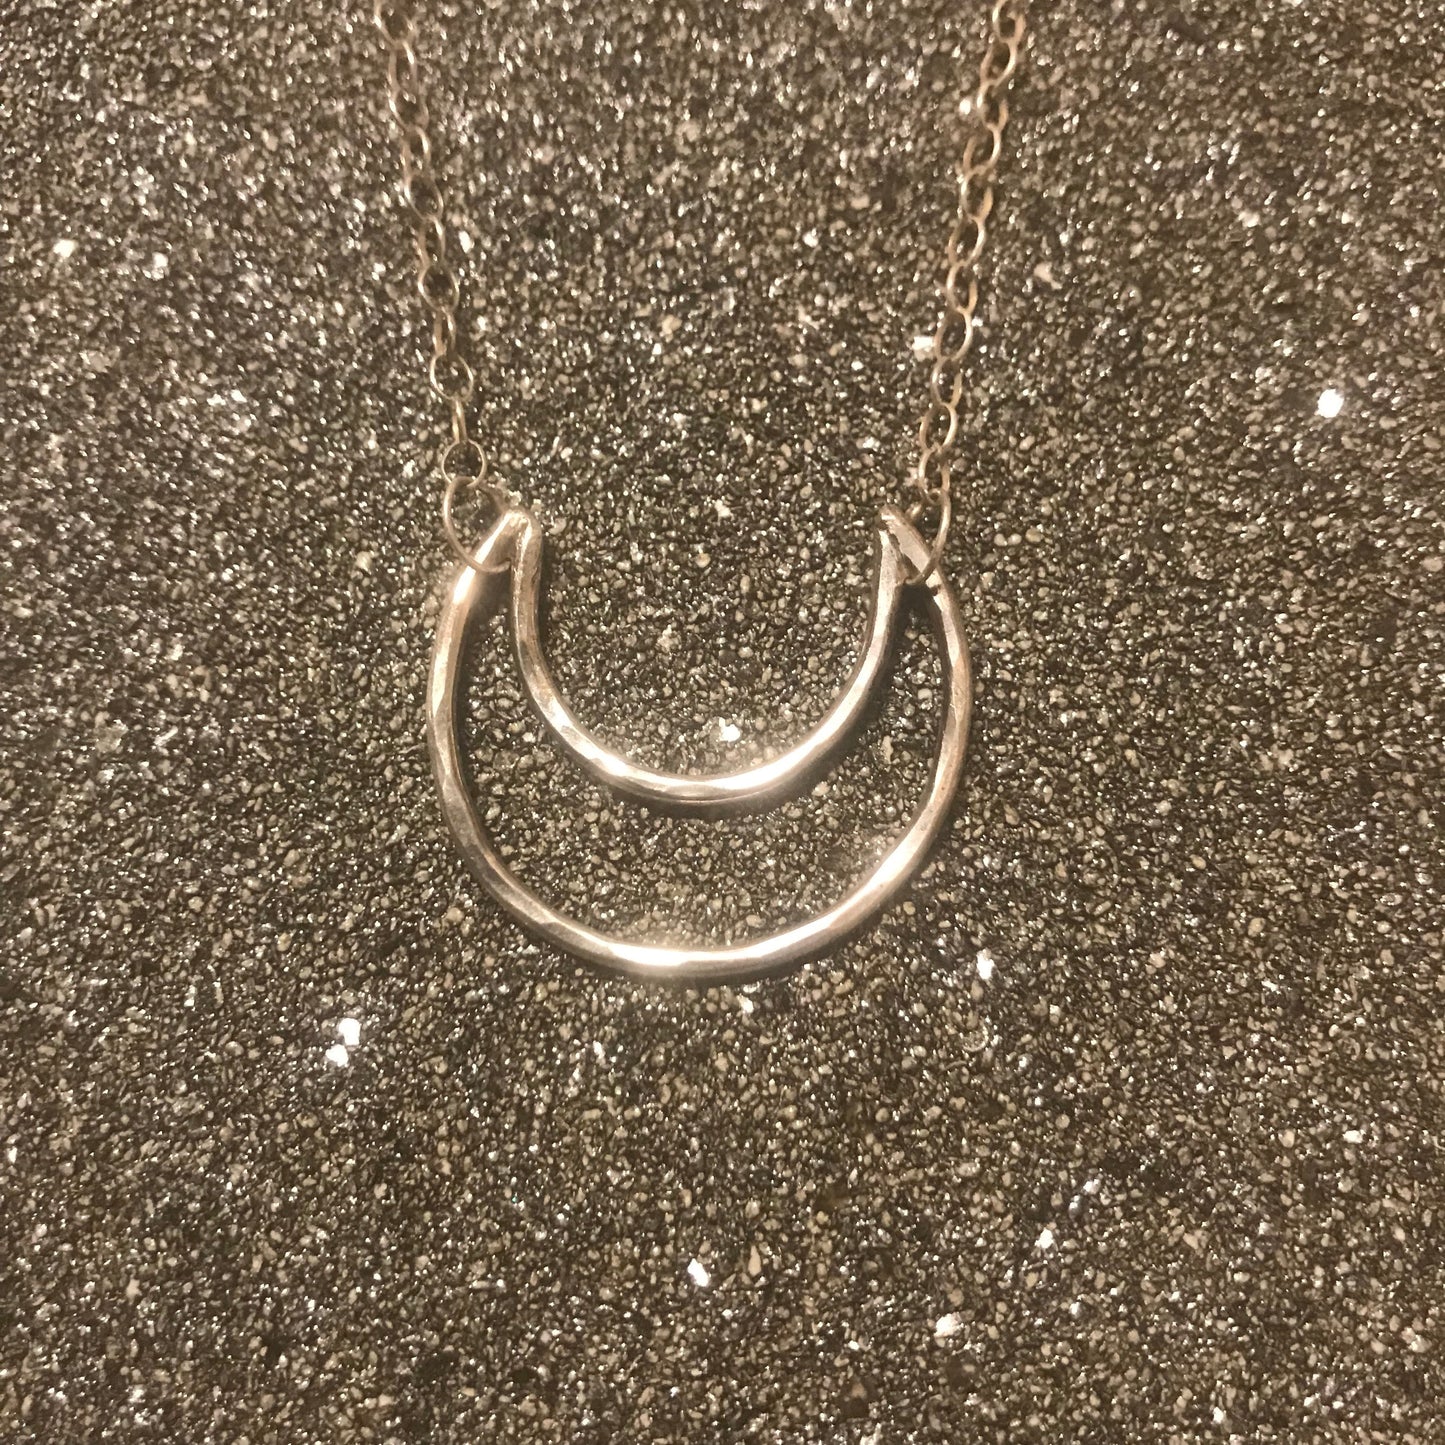 Small Sterling Crescent Moon Necklace - Hammered Crescent Moon - Silver Moon Necklace - Witchy Moon - Moon Phase Necklace - Hammered Moon